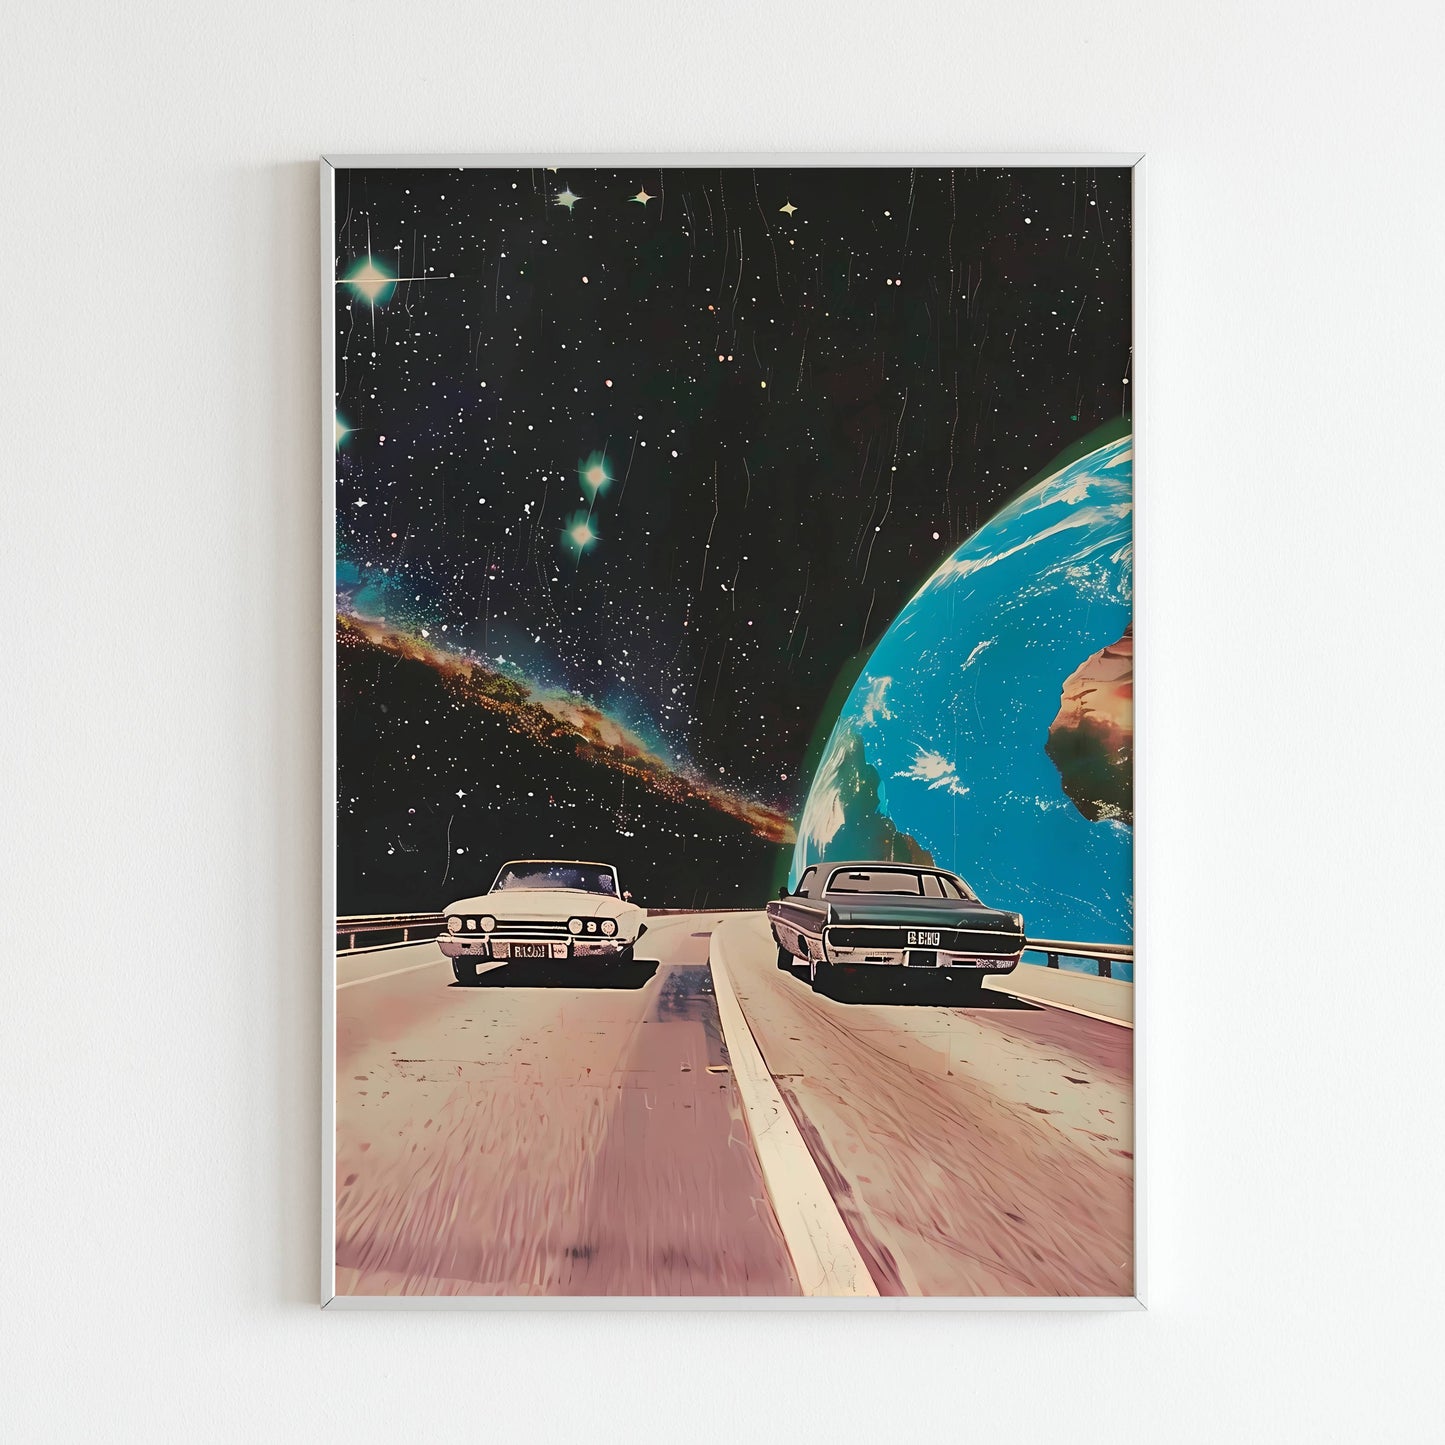 Embark on a cosmic adventure along a space road with this printable poster (physical or digital).